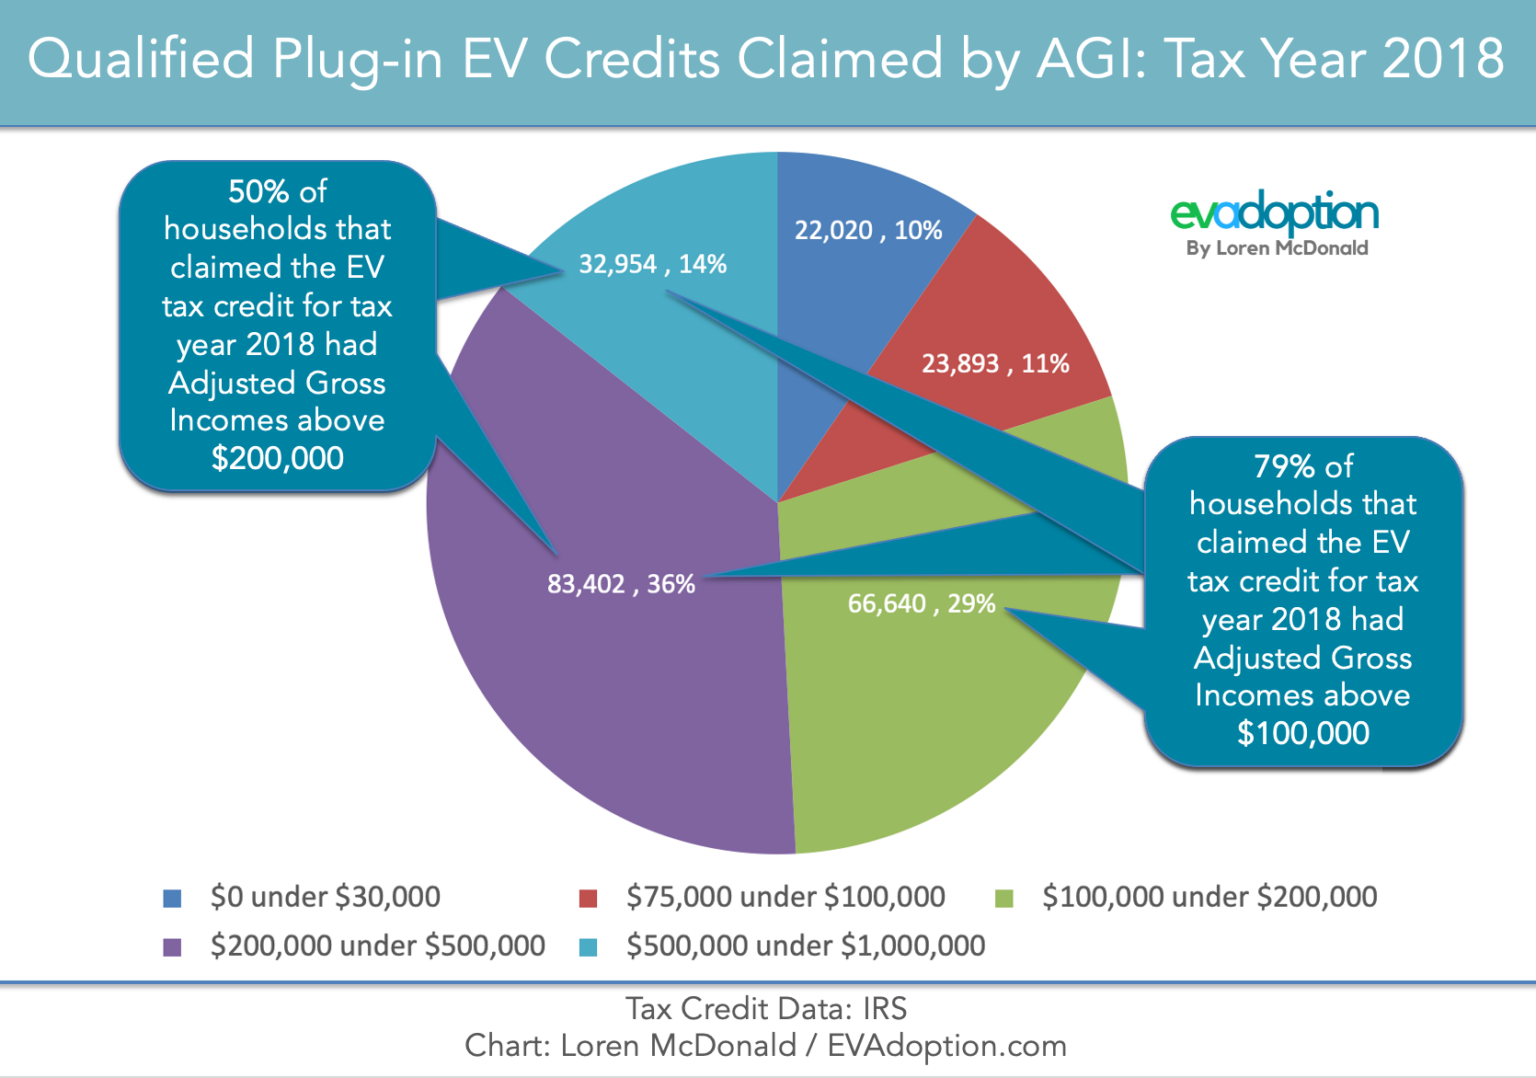 irs-tax-credit-by-household-agi-2018-updated-evadoption